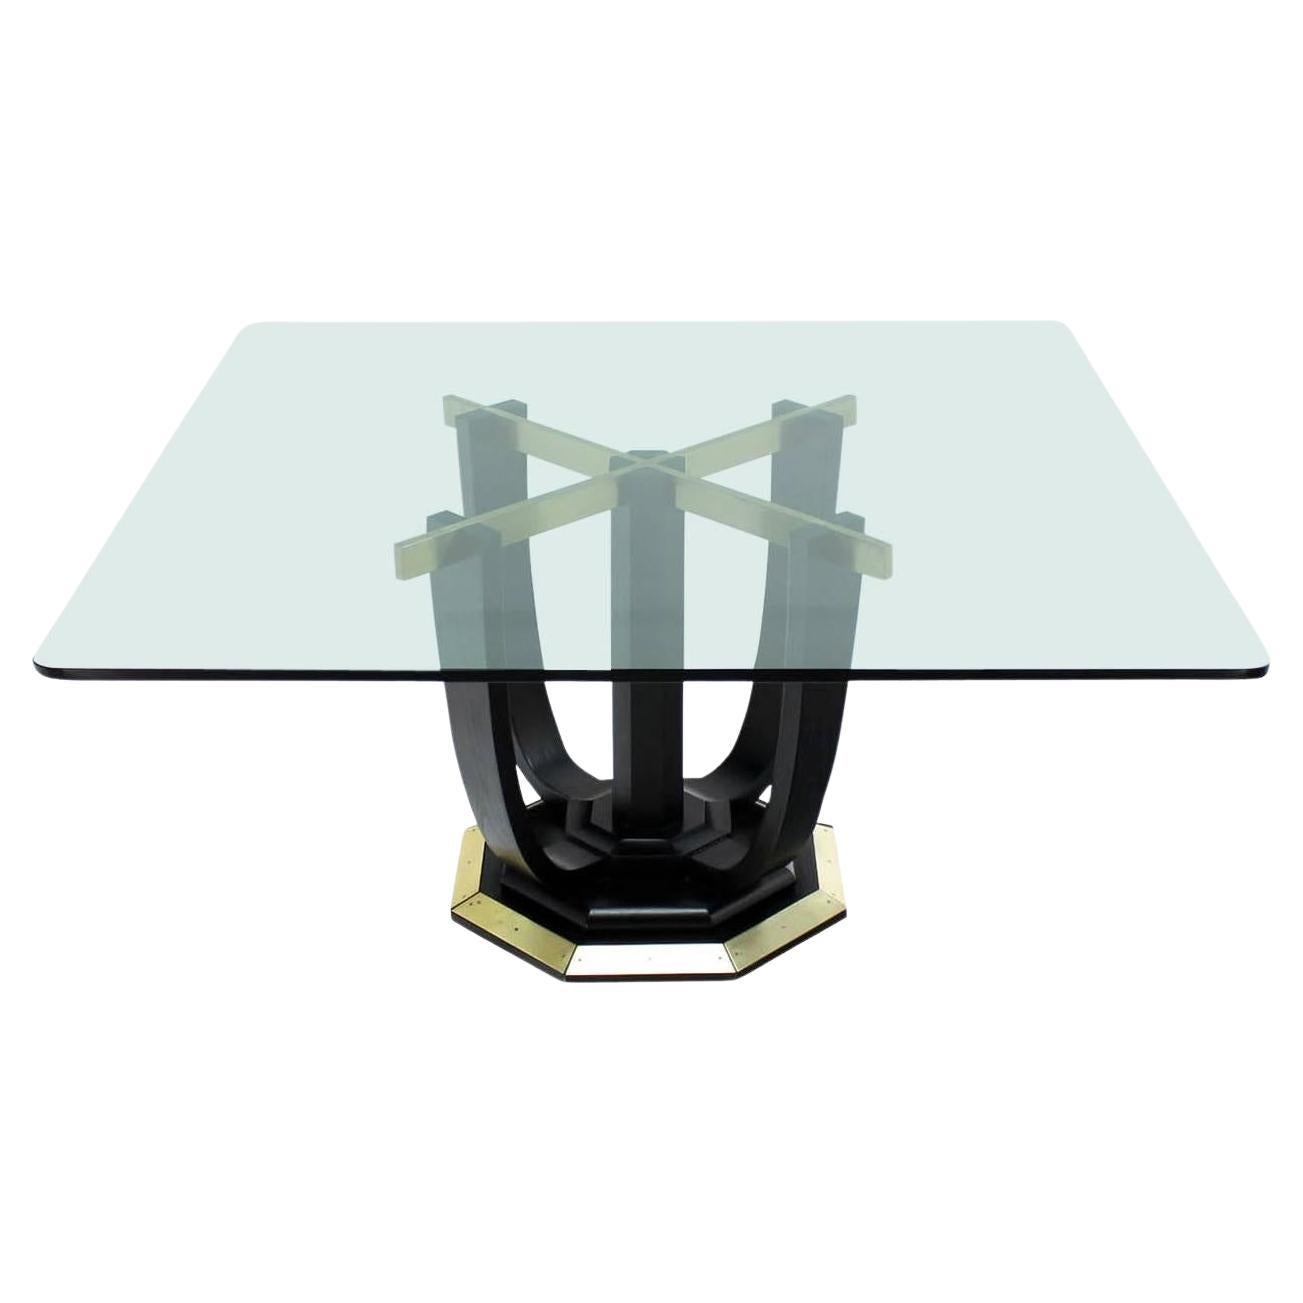 Large Square Glass Top Black Lacquer Brass Base Dining Conference Table MINT